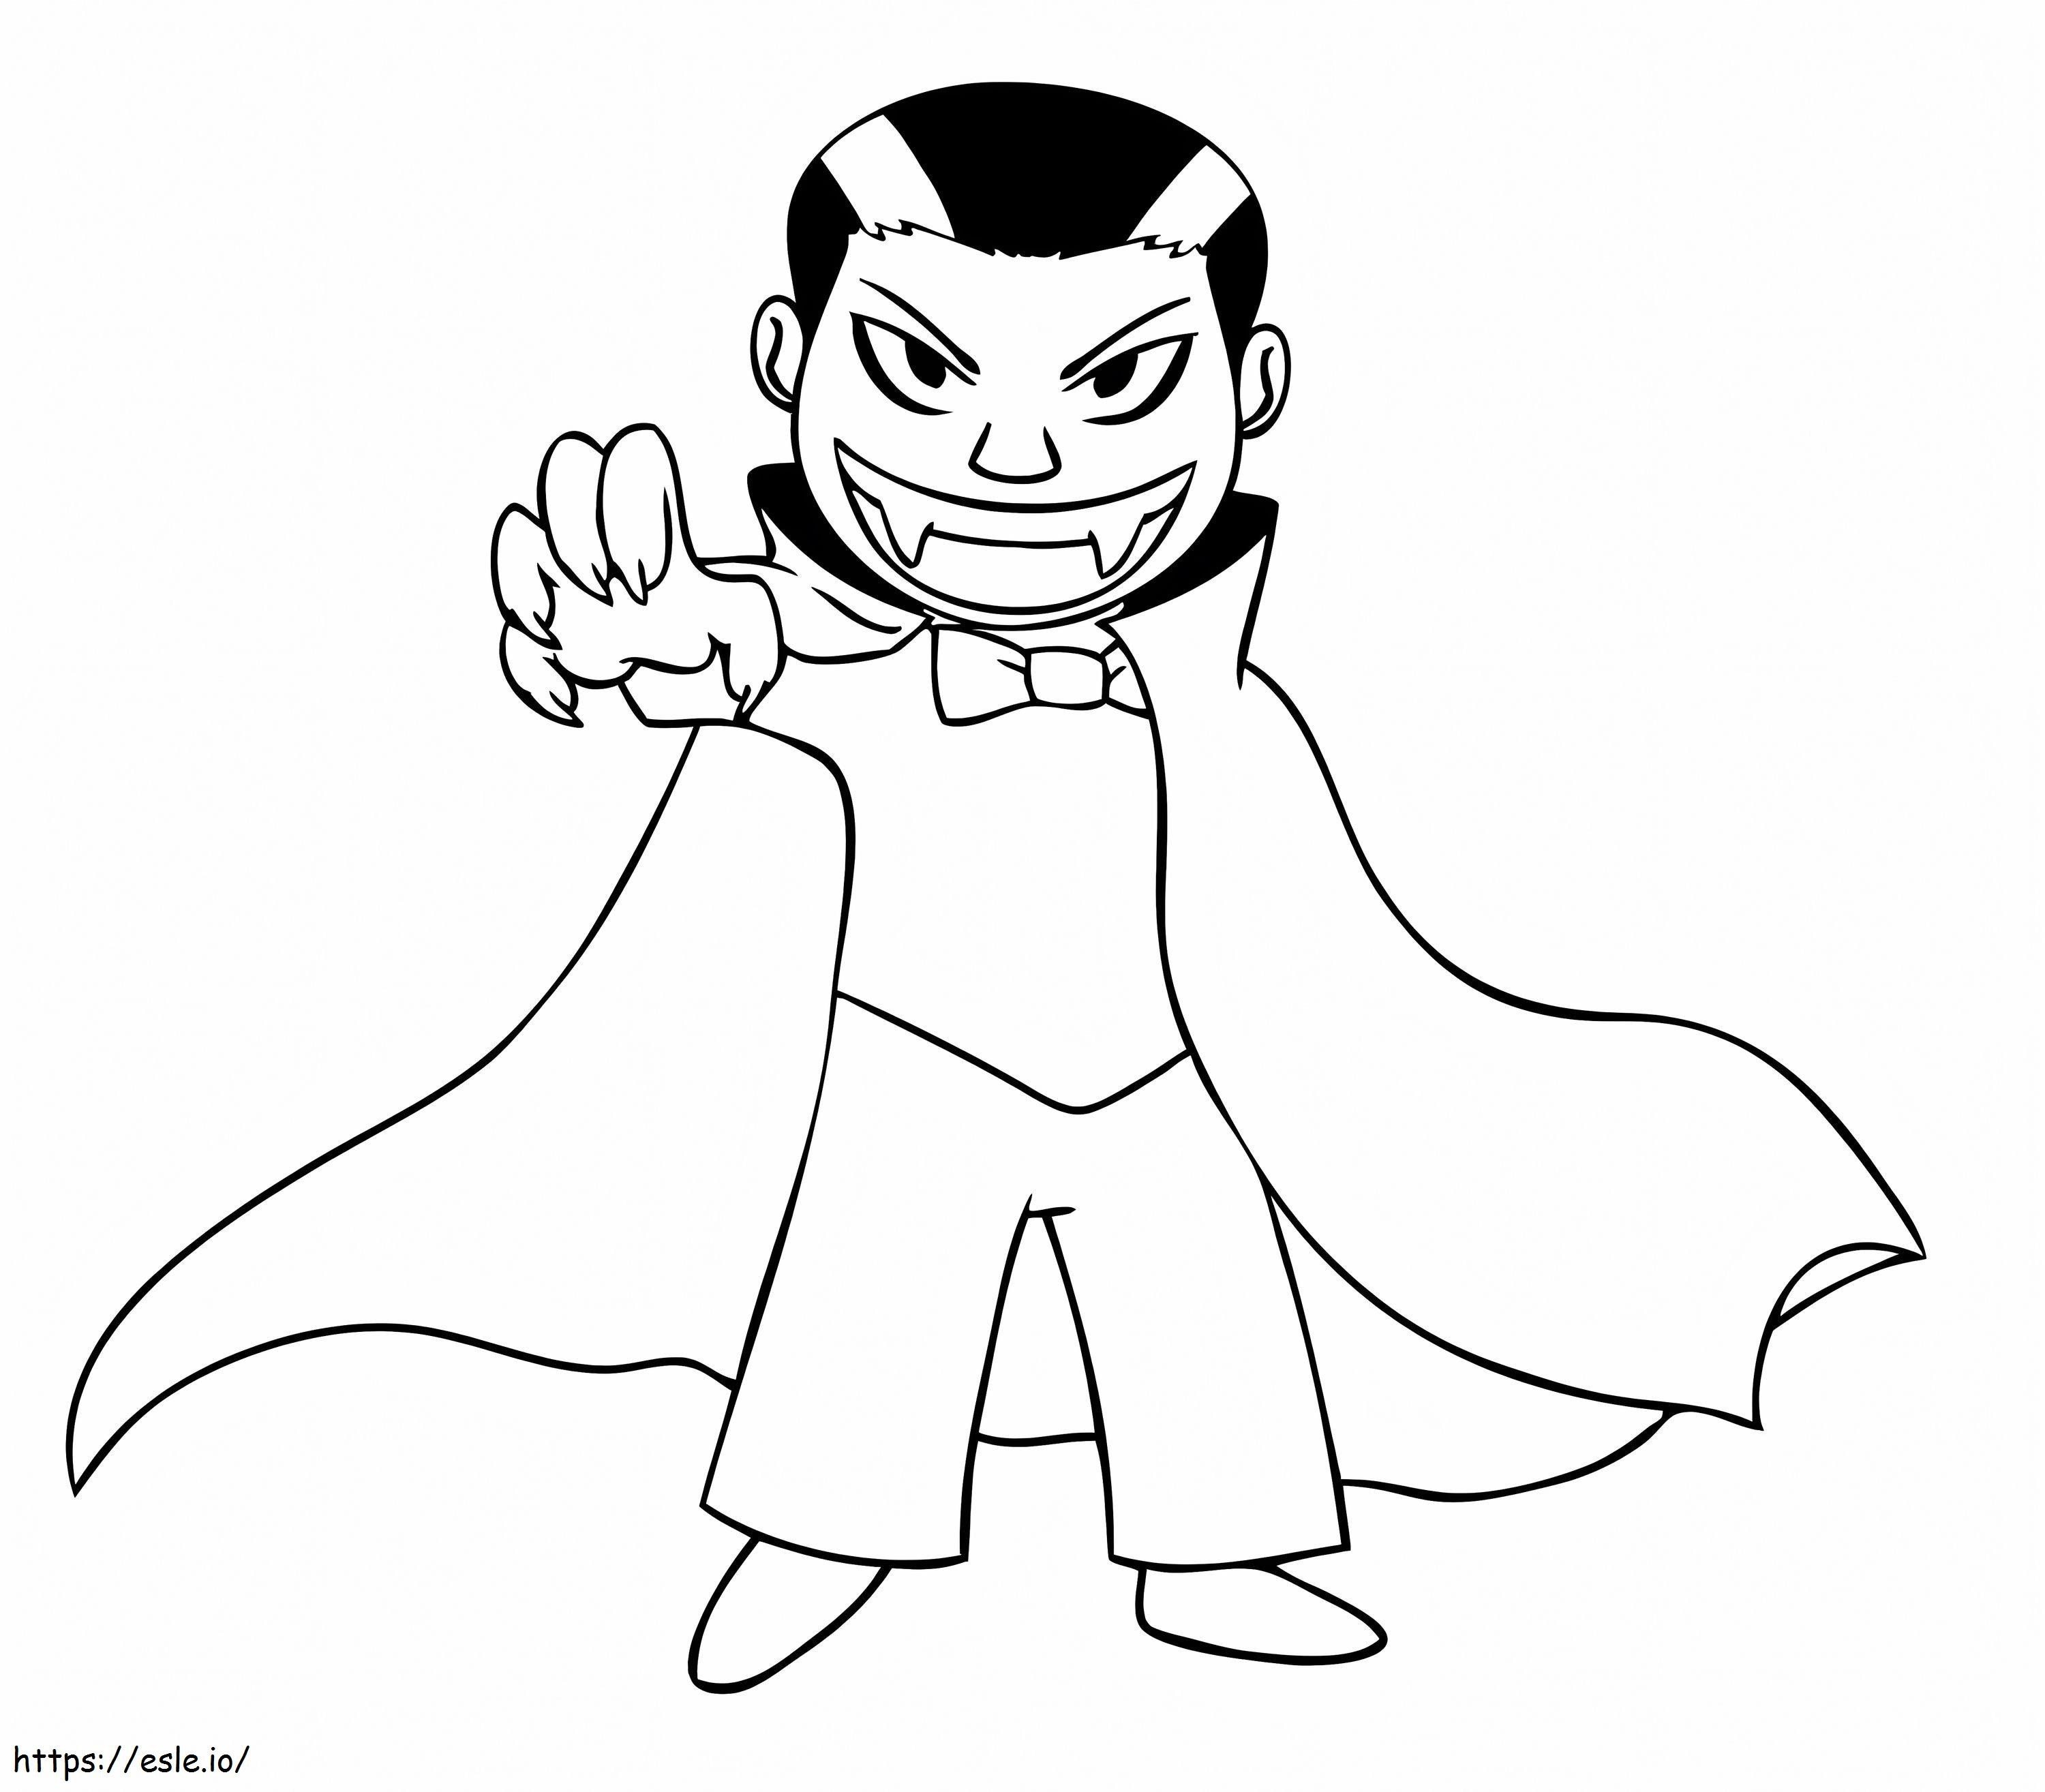 Funny Vampire coloring page